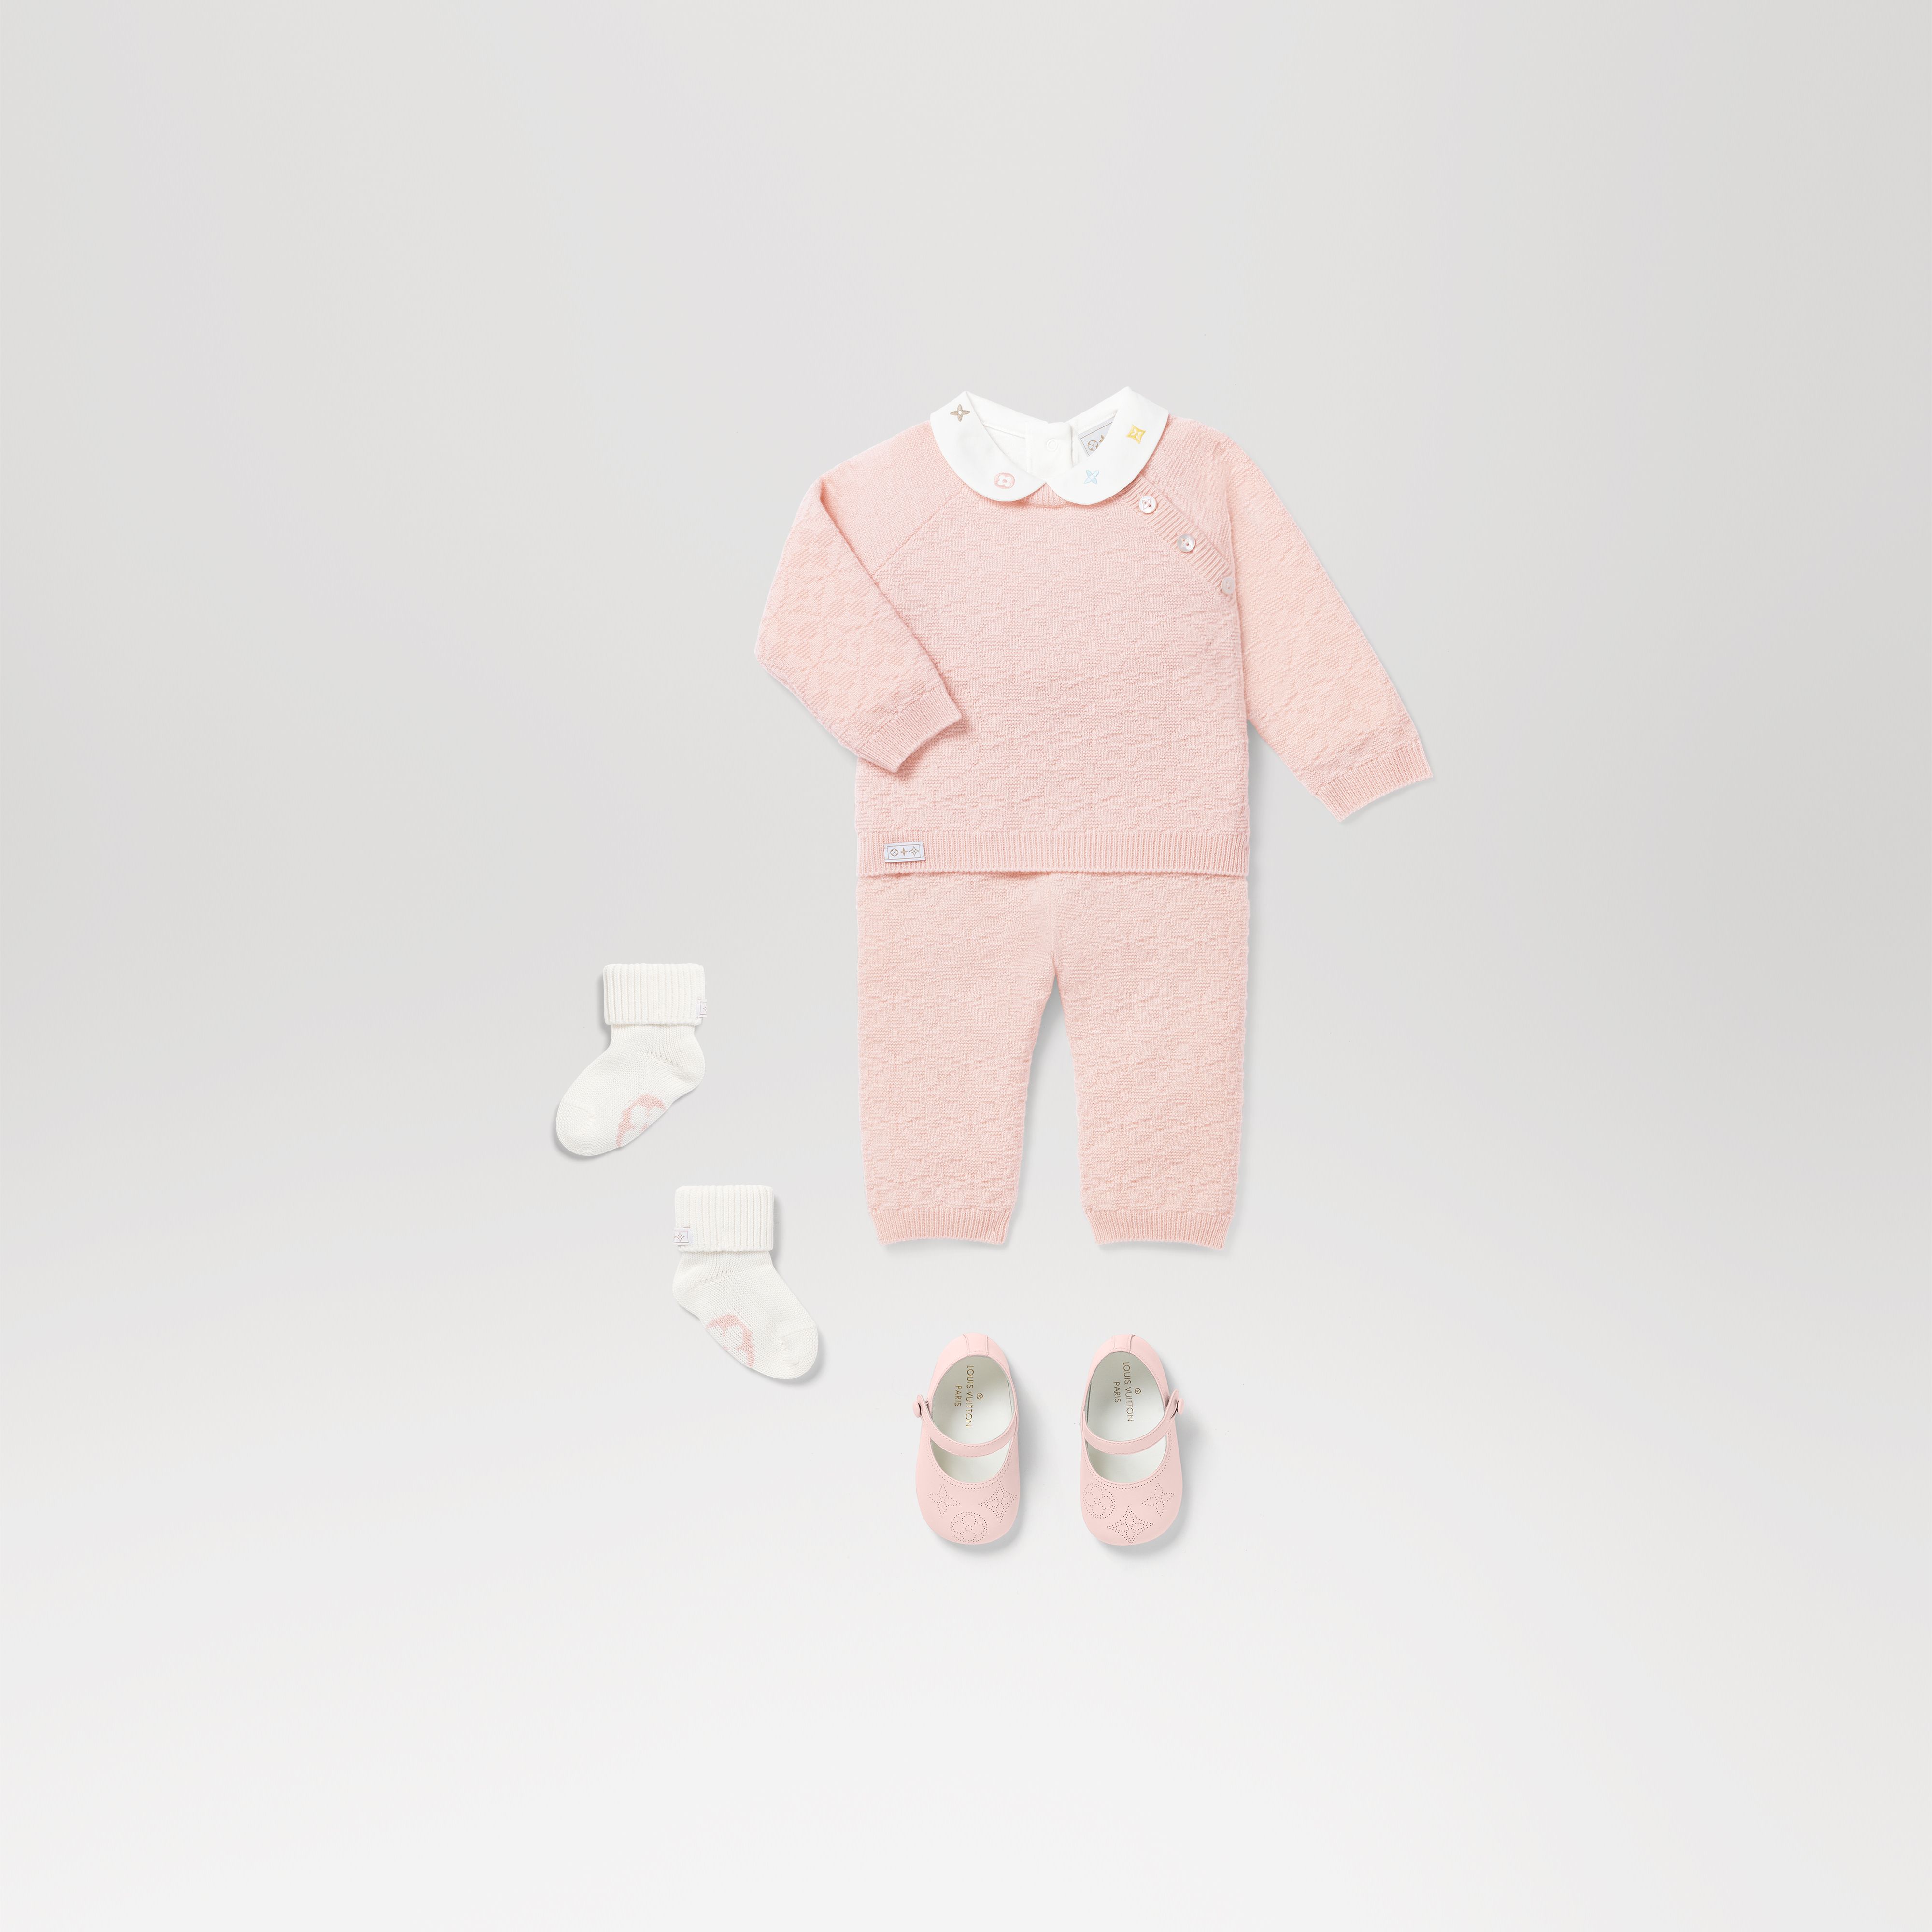 Louis Vuitton: First-ever baby collection - Suitcase and Chardonnay